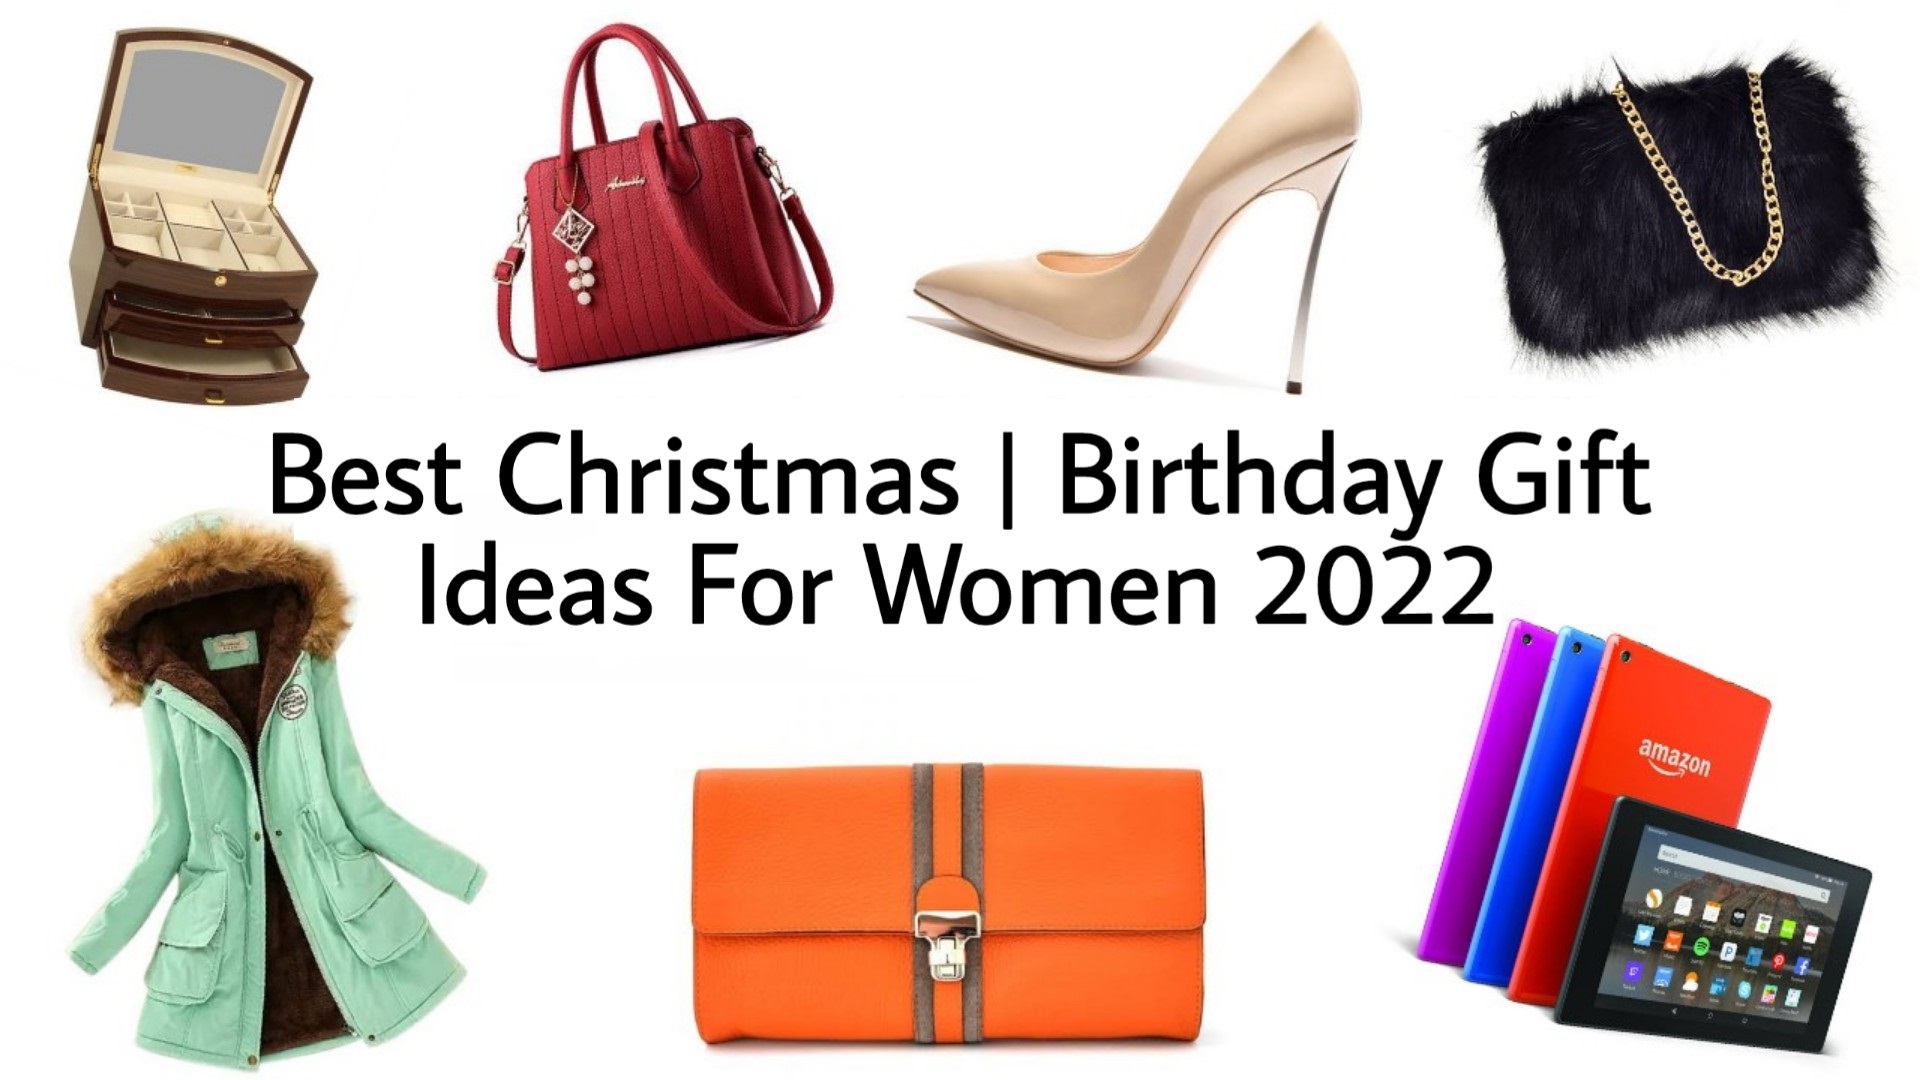 2022 Best Christmas Gifts for Women | Best Birthday Gifts For Women 2022